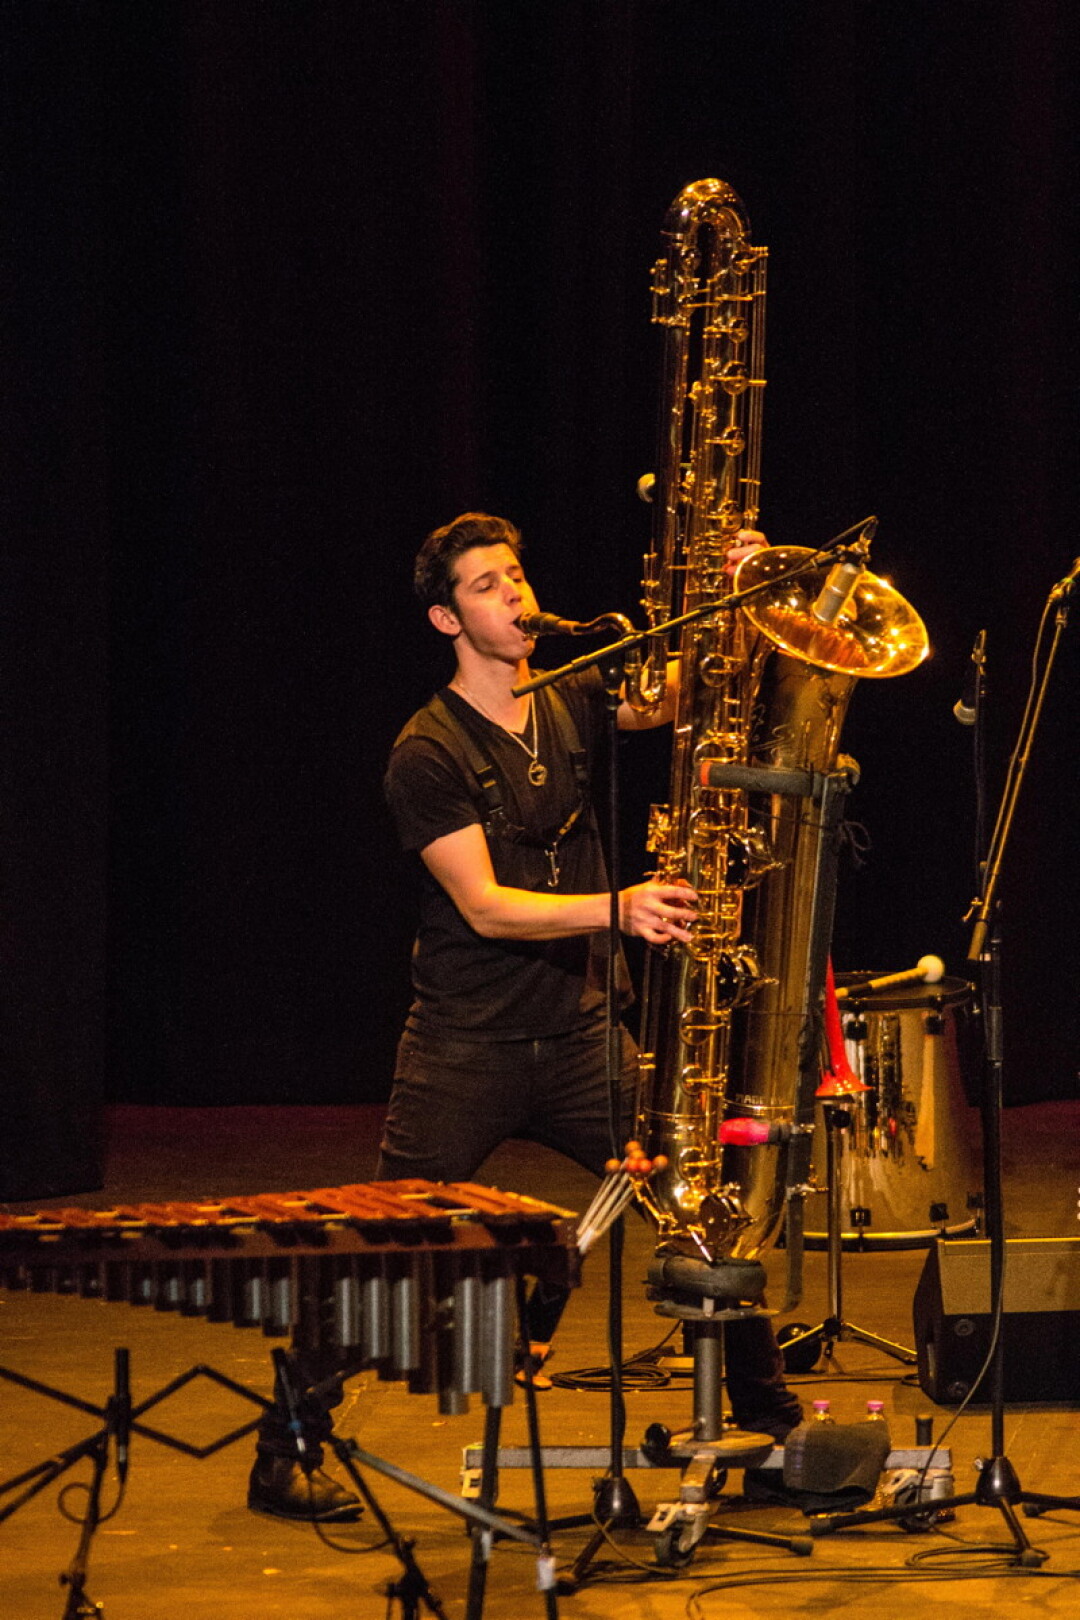 HEY, CAN WE GET A BIGGER SAXOPHONE OVER HERE? Sax gods with amazing horns were just part of the show when the Violent Femmes came to the State Theatre on Wednesday, October 25.